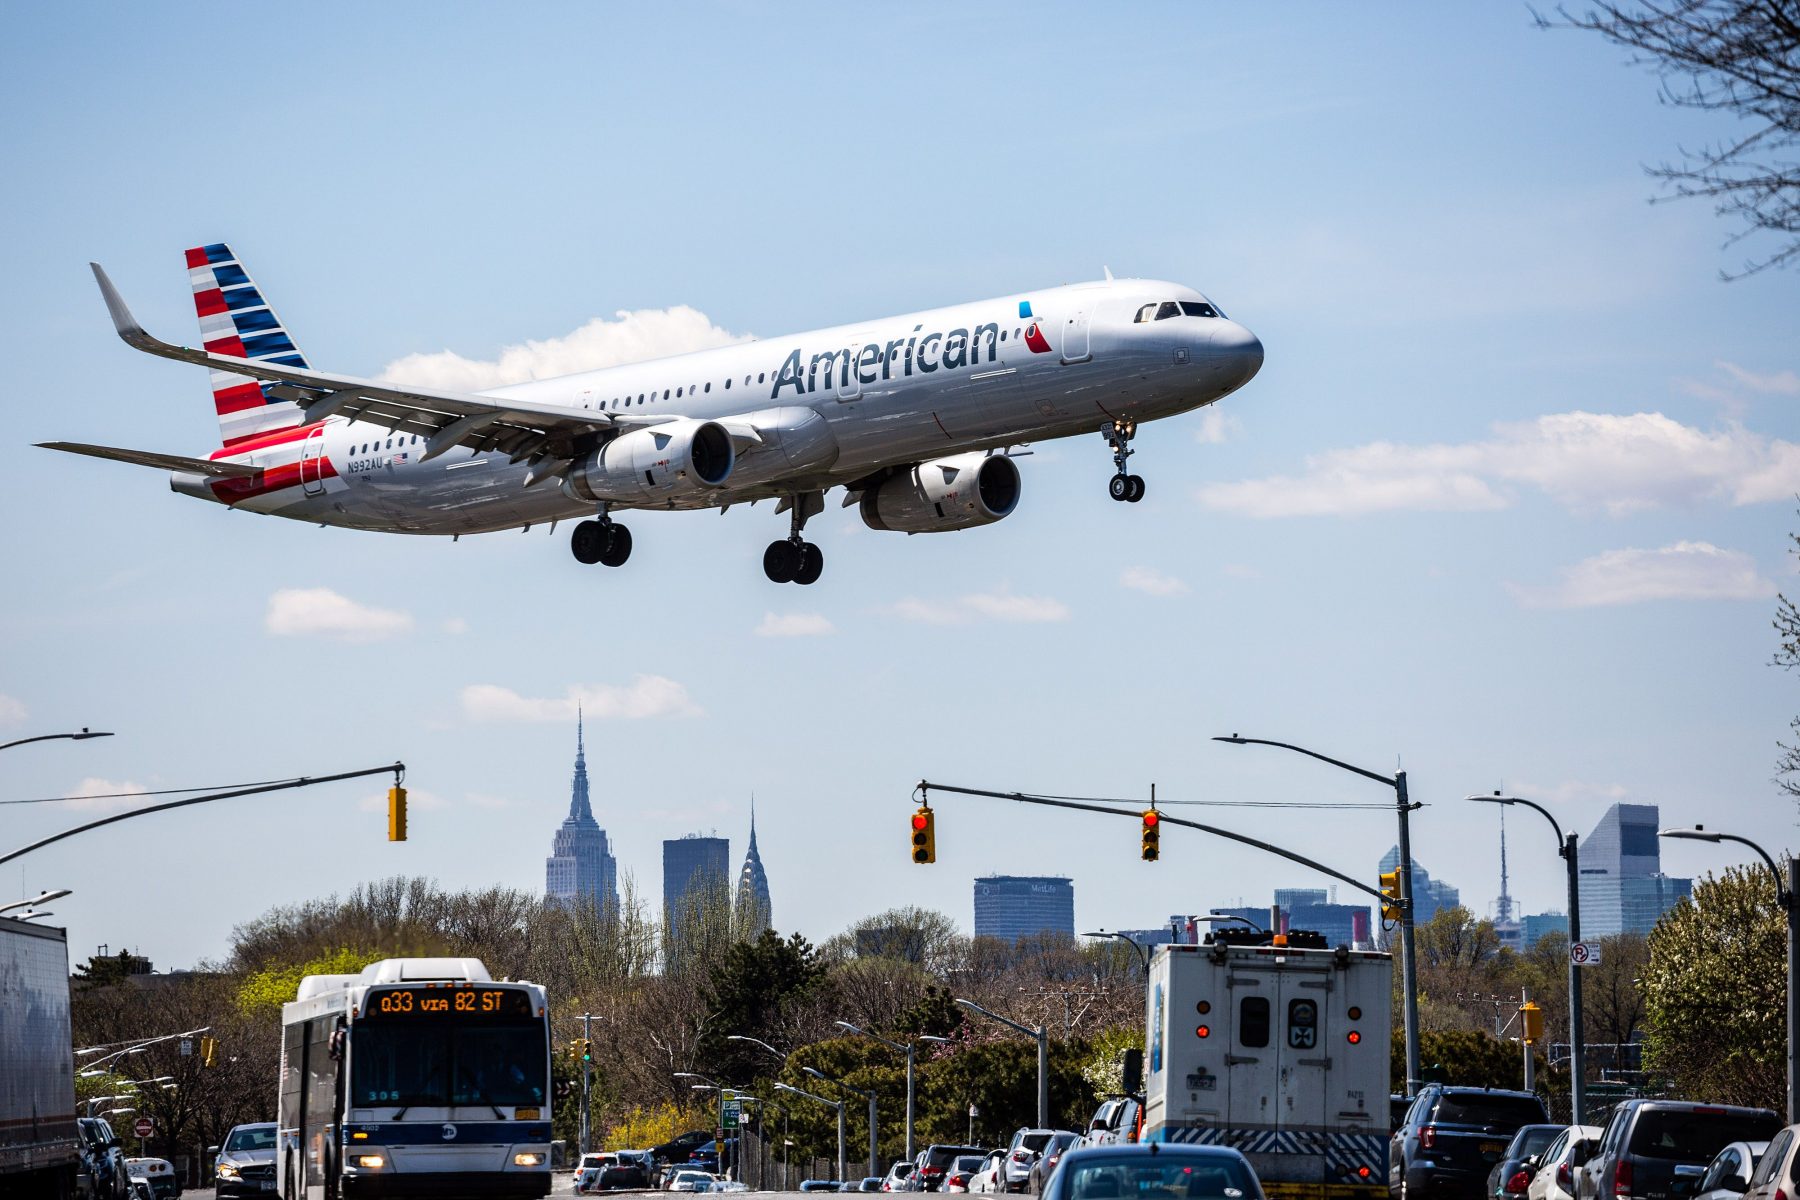 For 7,500 American Airlines Bonus Miles You Can Fly One-Way Coach to Destinations <500 Miles in Length.